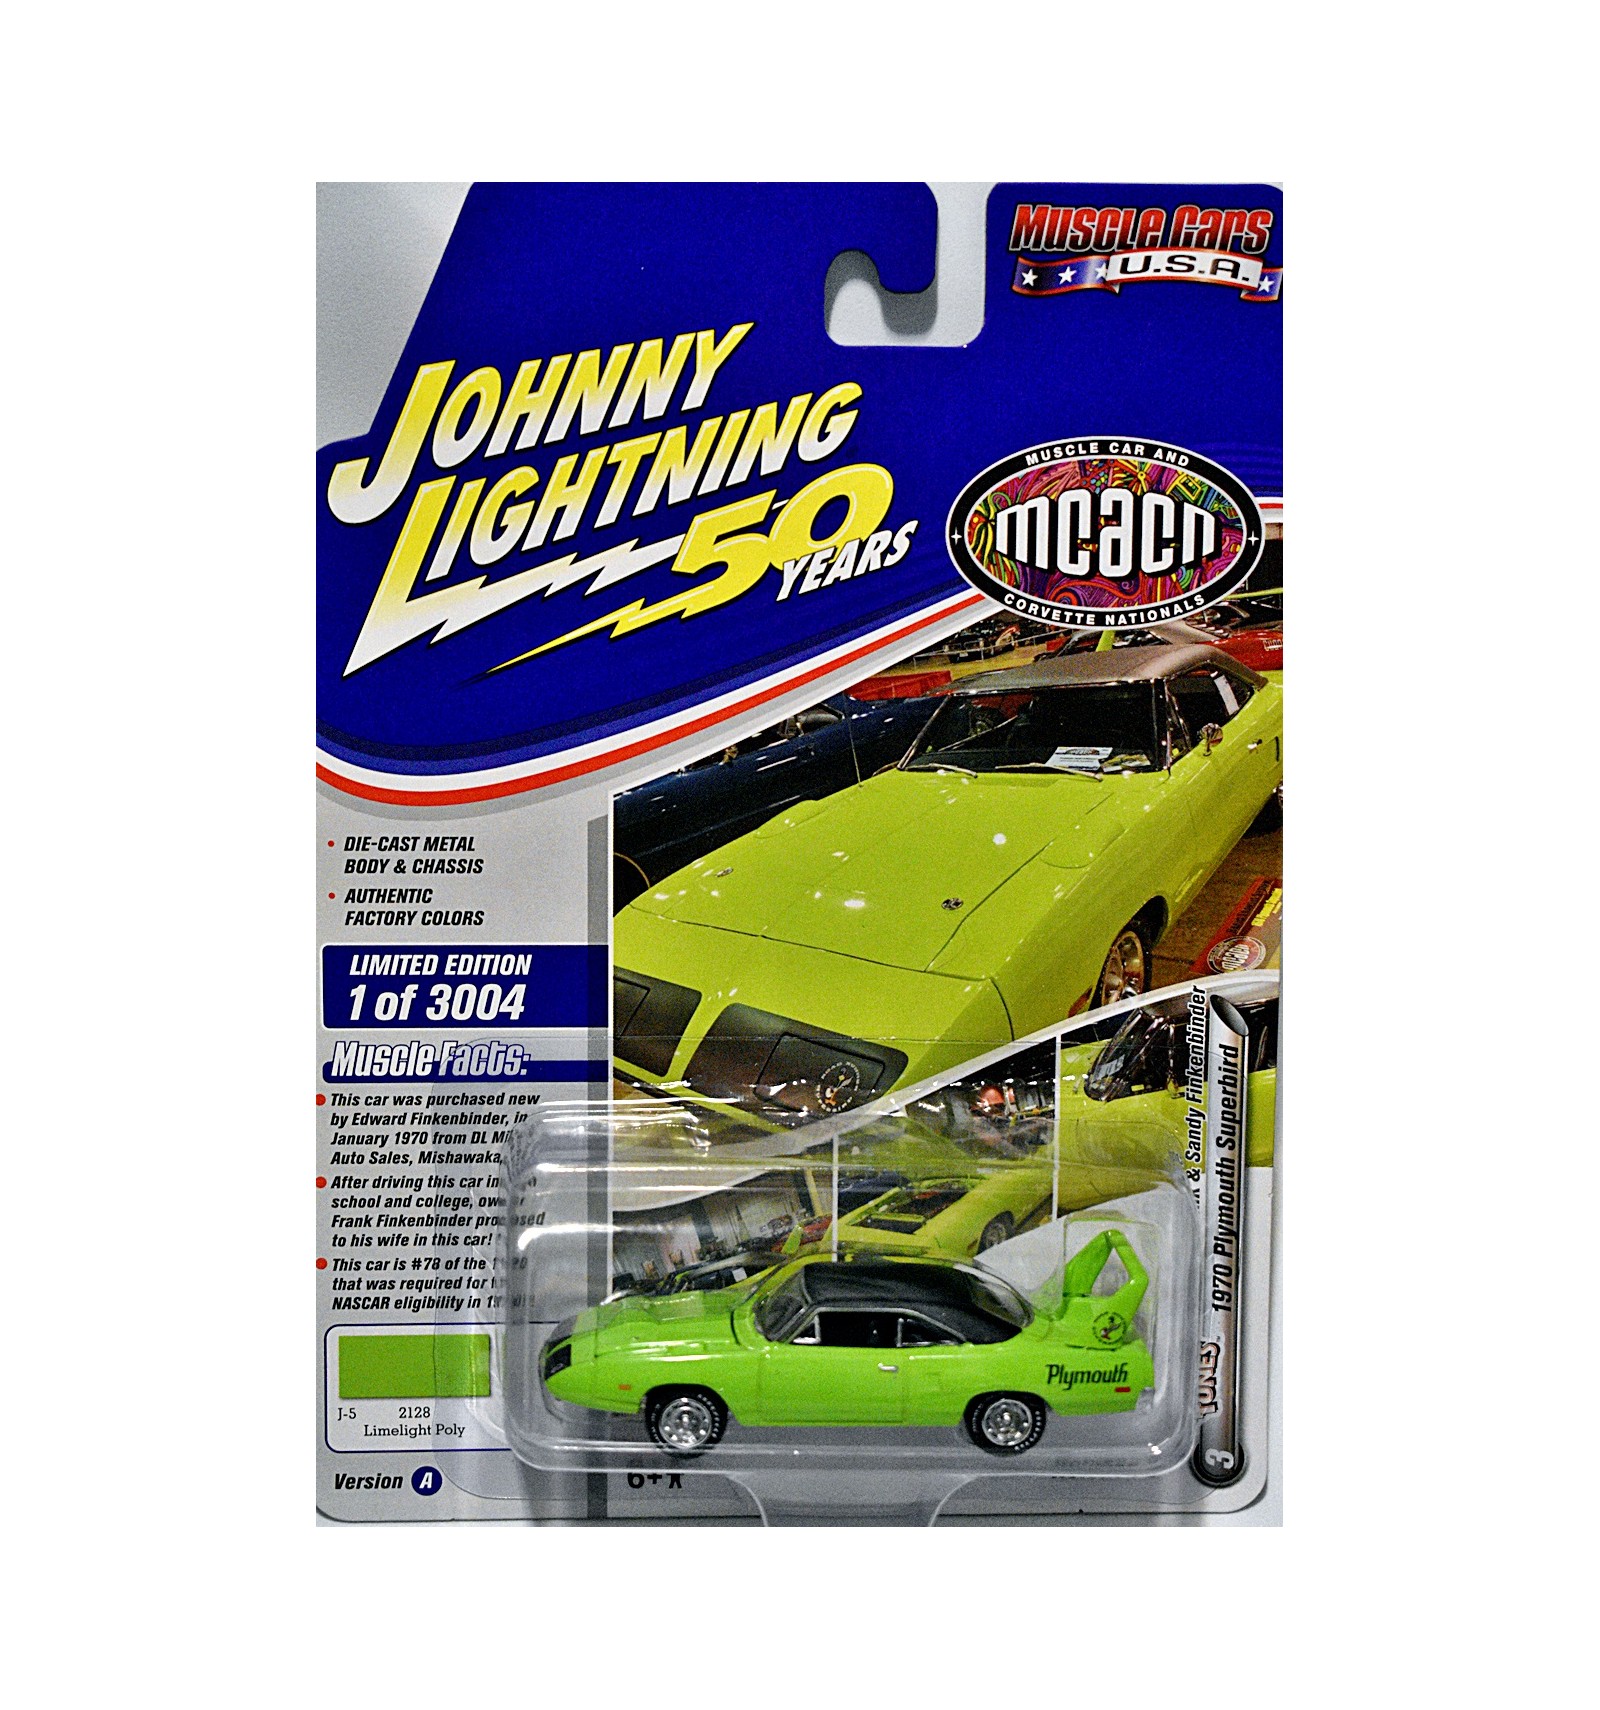 Johnny Lightning Muscle Cars USA 1970 Plymouth Superbird Limited Edition Vintage Diecast Car